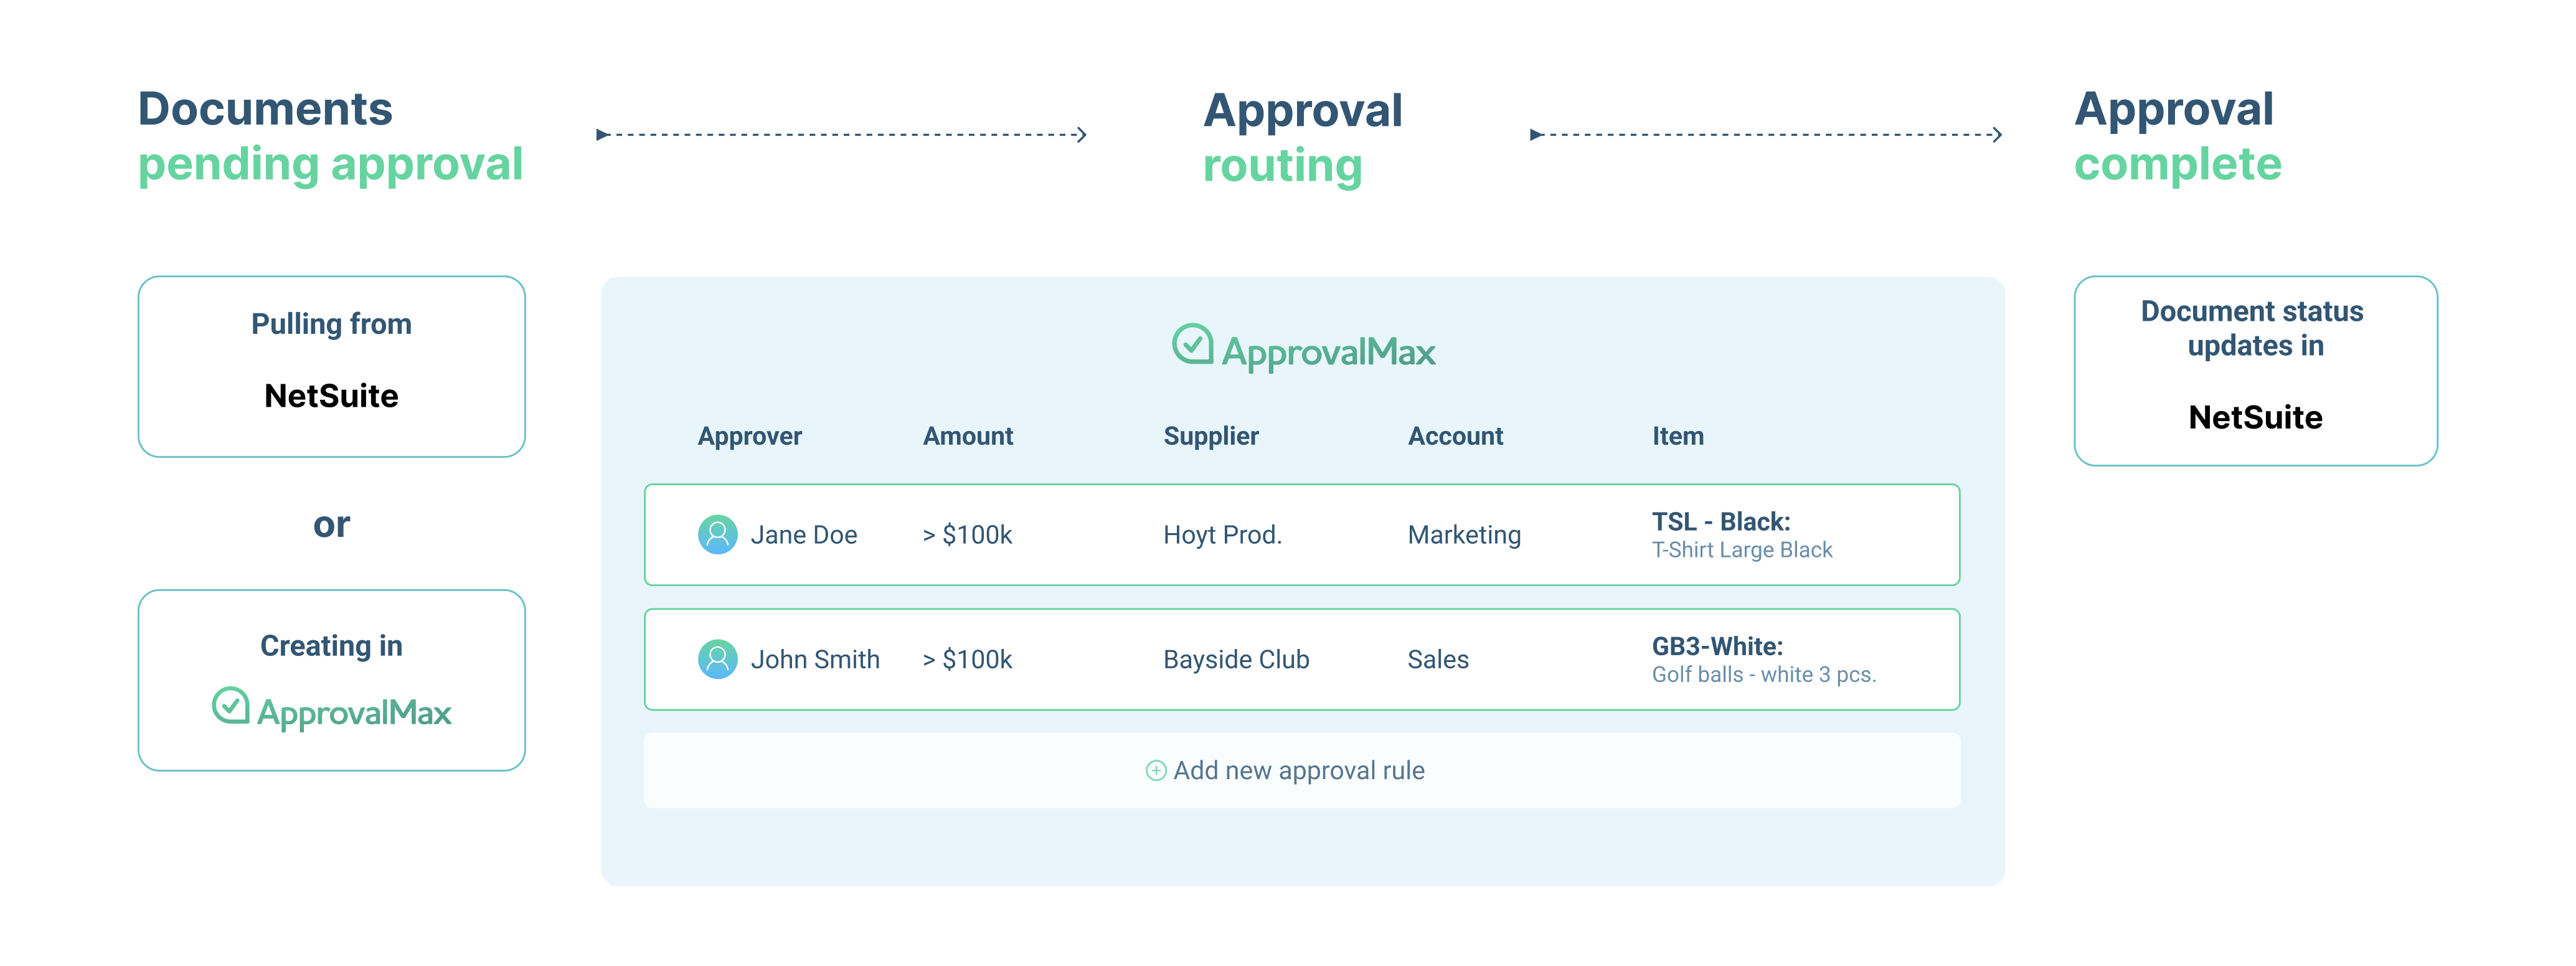 How documents go from pending approval in Netsuite or ApprovalMax, through the routing, to approval complete in Netsuite.